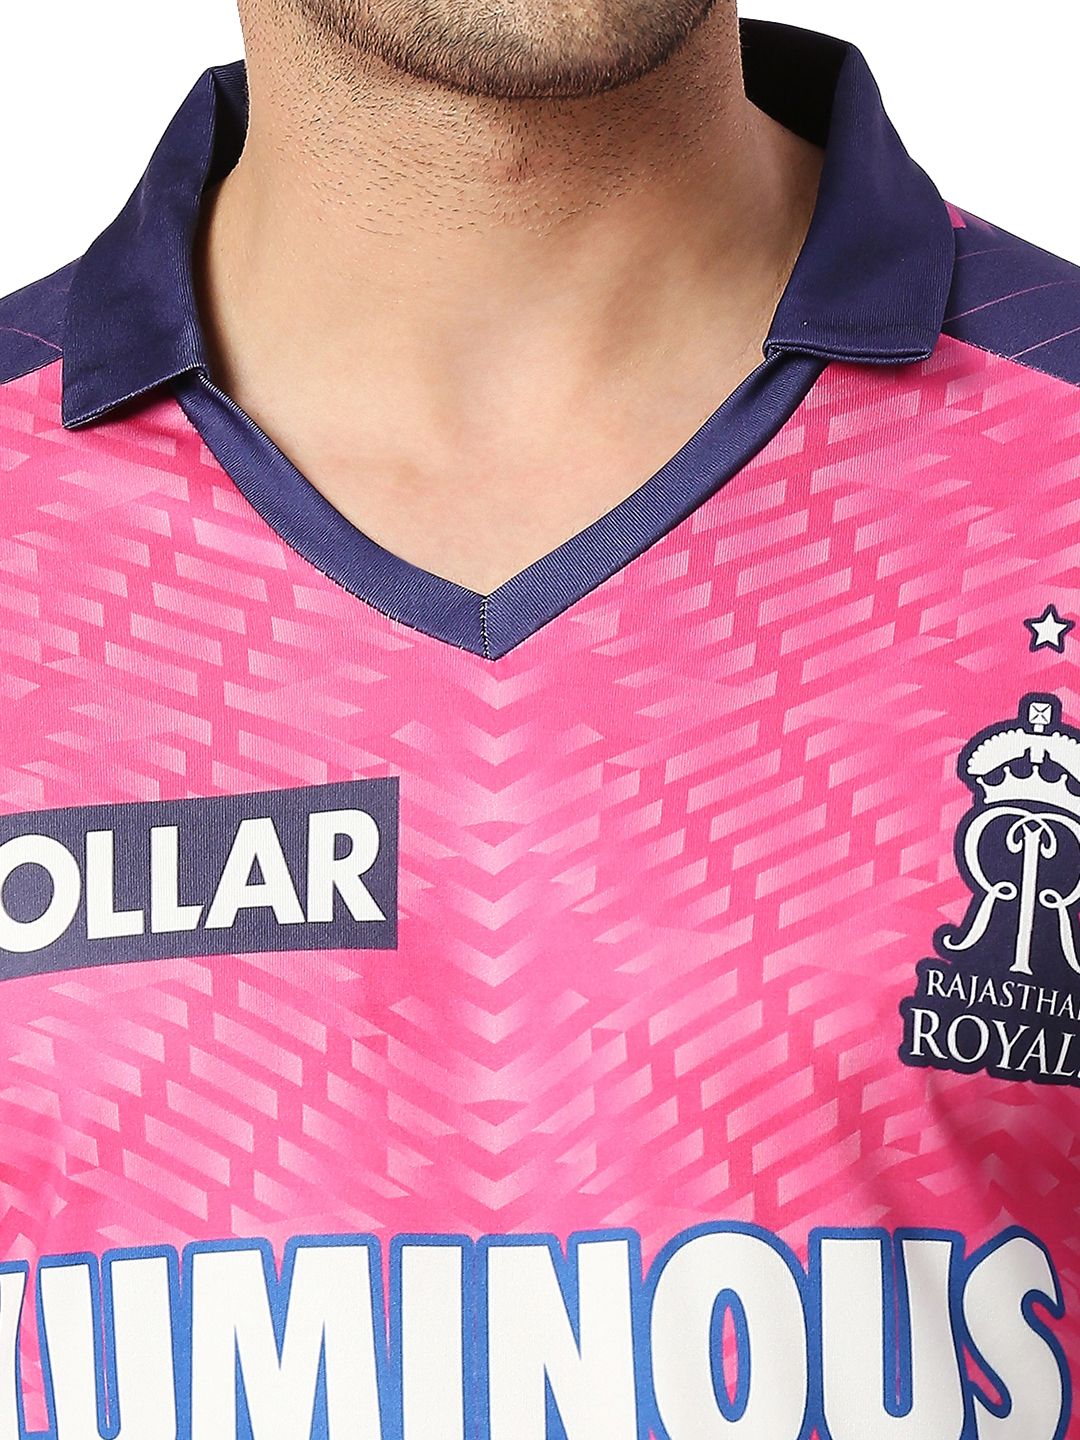 Buy Rajasthan Royals Match Jersey 2023 - Full Sleeve From Fancode Shop.